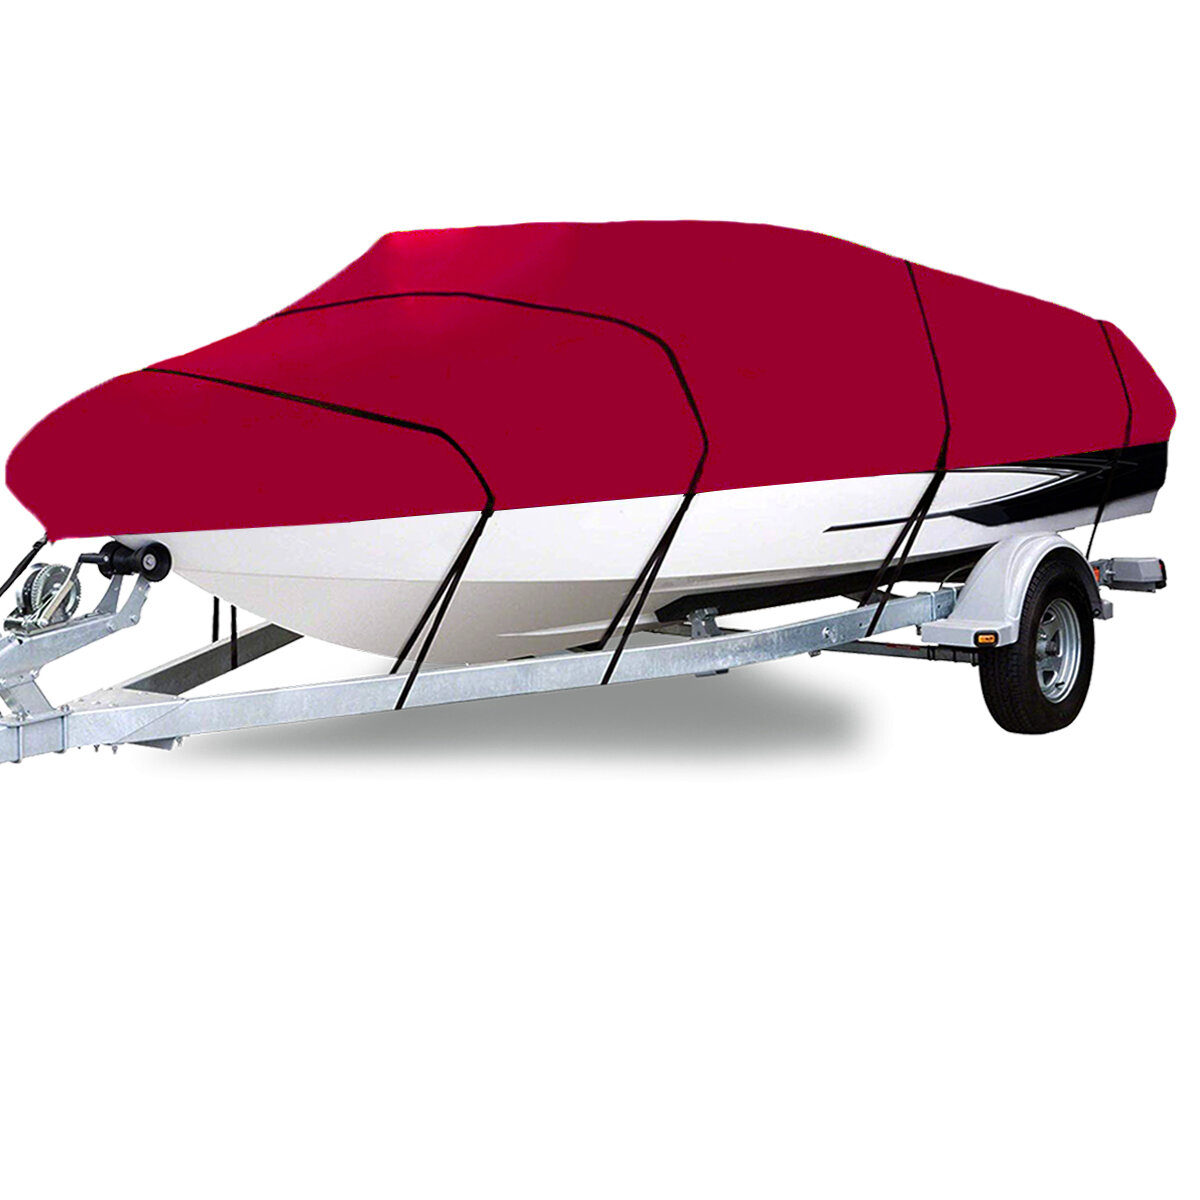 Image of 210D 11-22FT Heavy Duty Boat Cover Waterproof Dustproof Trailerable Fishing Ski Bass V-Hull Runabouts Red